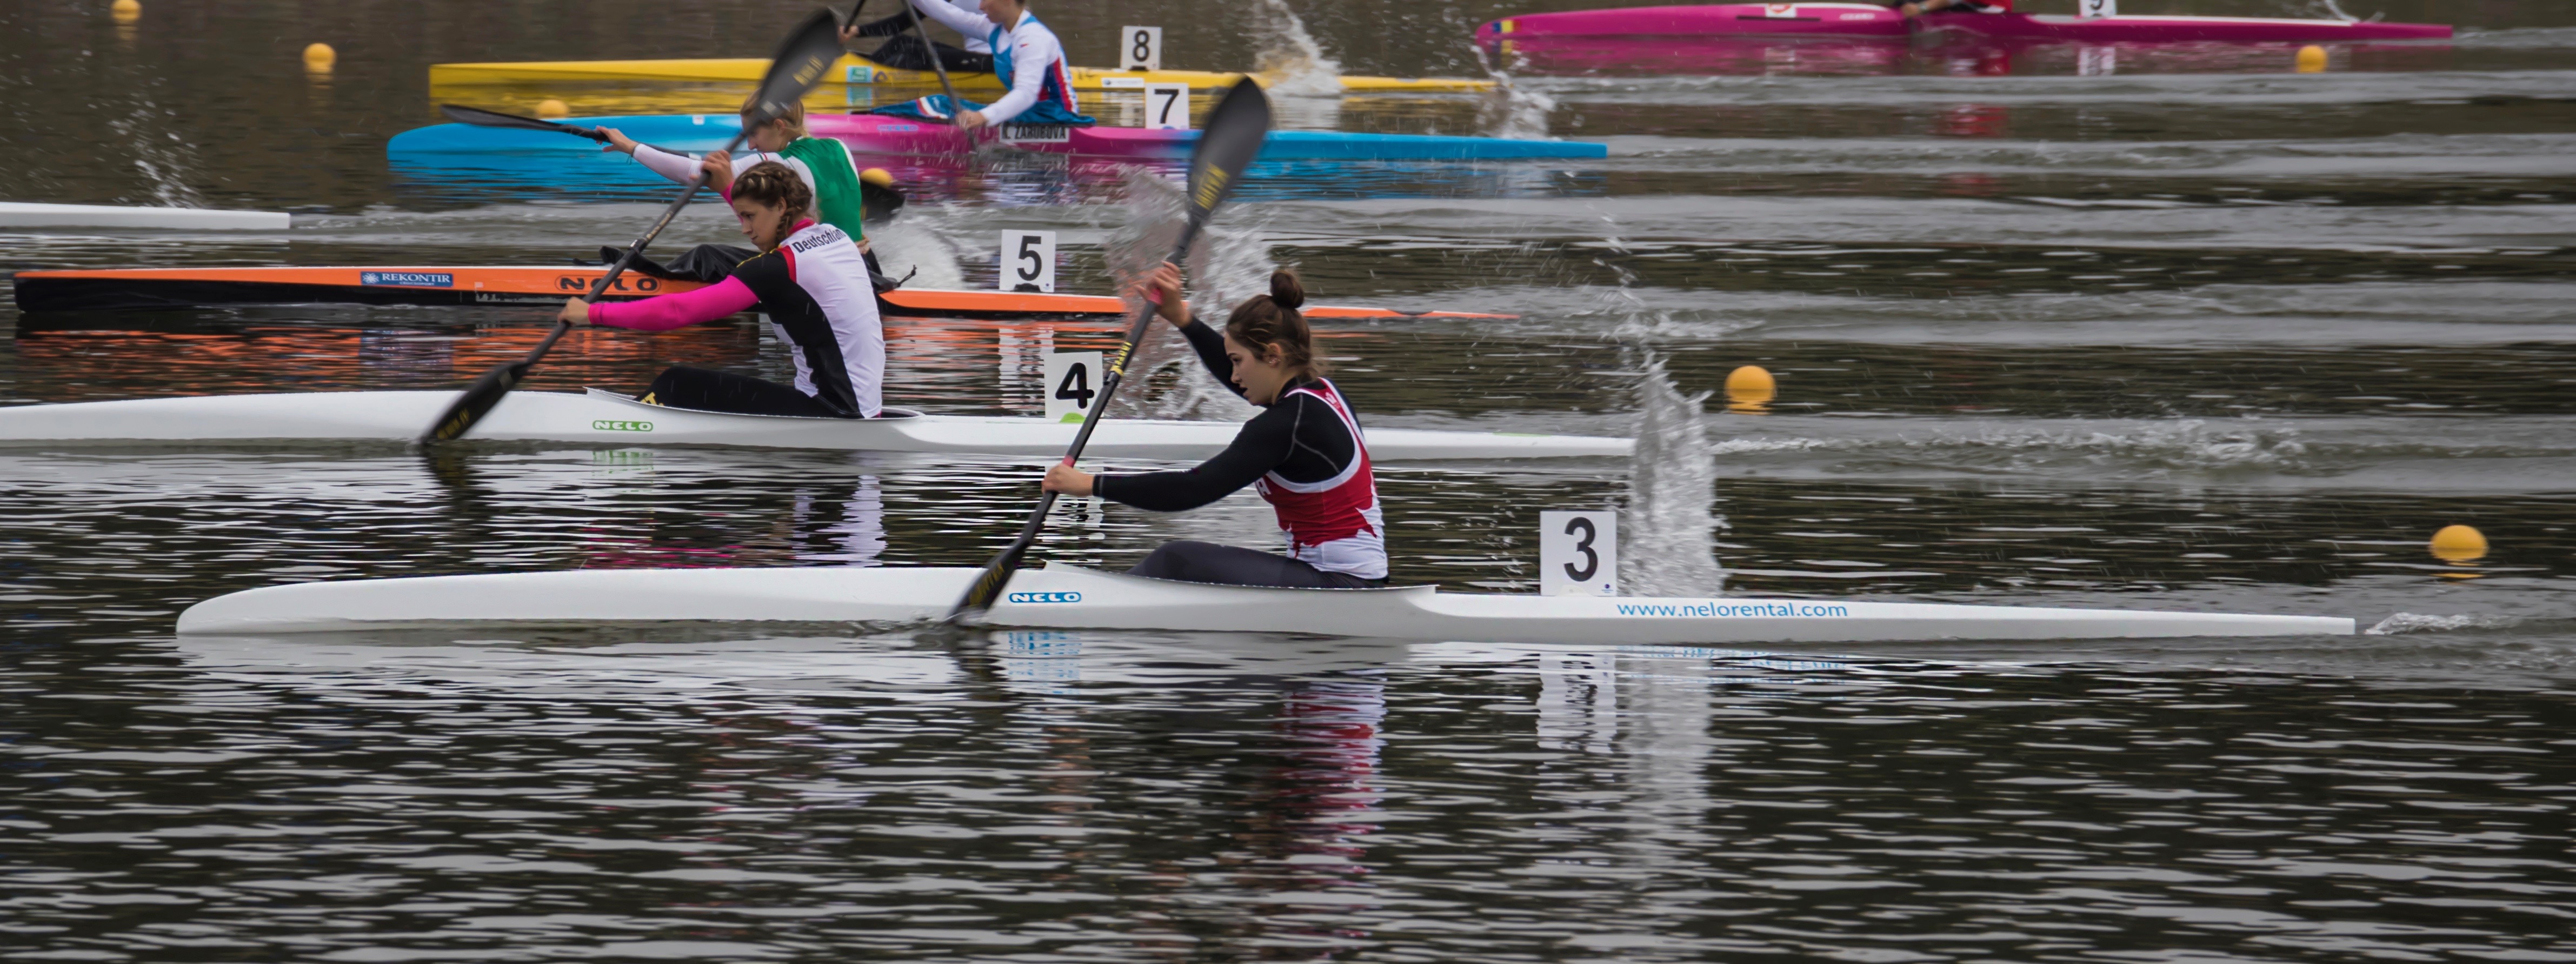 Canadian Team Gets 6 Medals on Day 2 of the Olympic Hopes Regatta